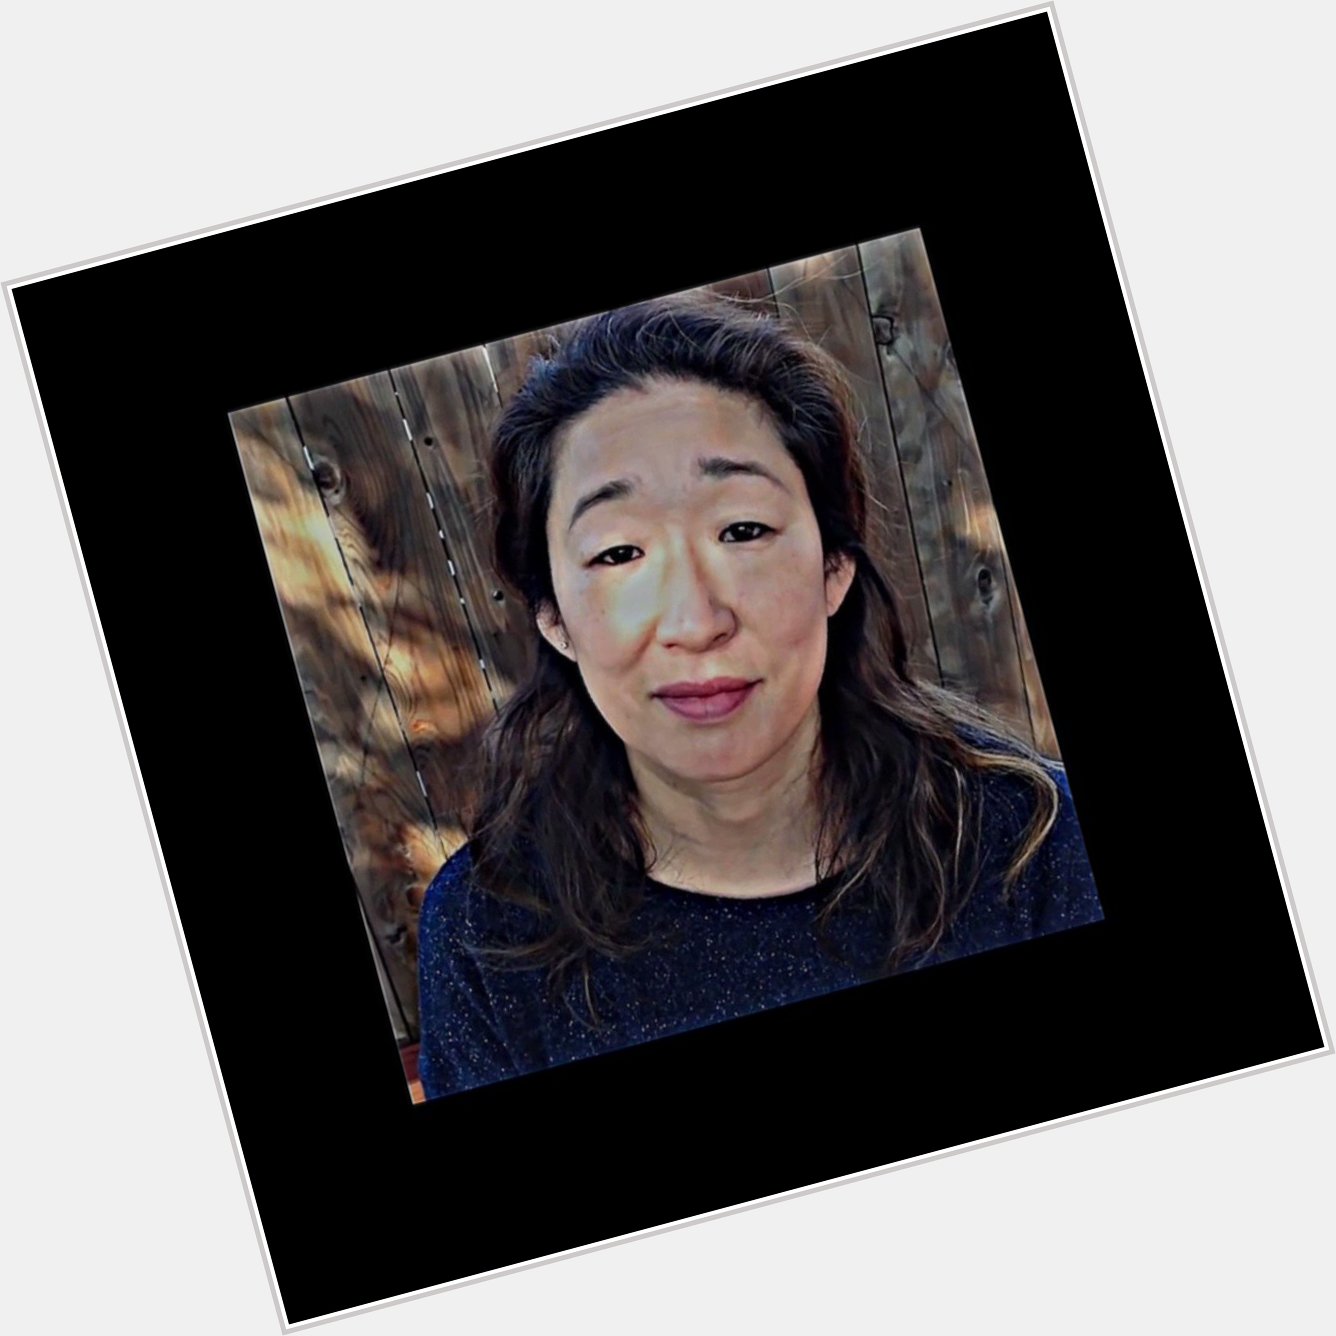  happy birthday to the most adorable human being in the whole world. sandra oh, my beloved! <3 